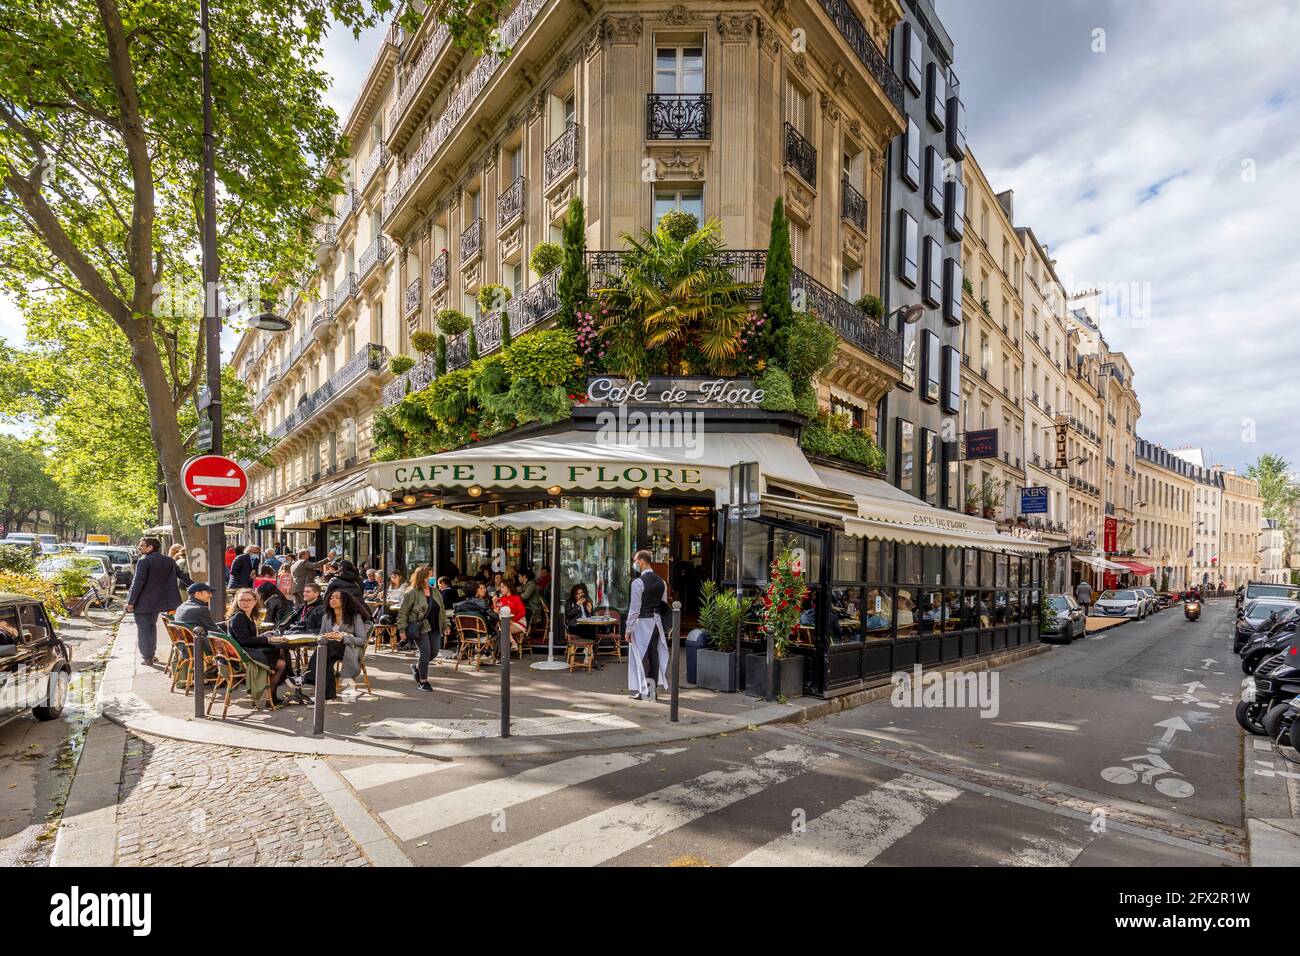 Paris, France - May 19, 2021: Day after lockdown due to covid-19 in a famous Parisian cafe. 2 waiters wear surgical masks Stock Photo